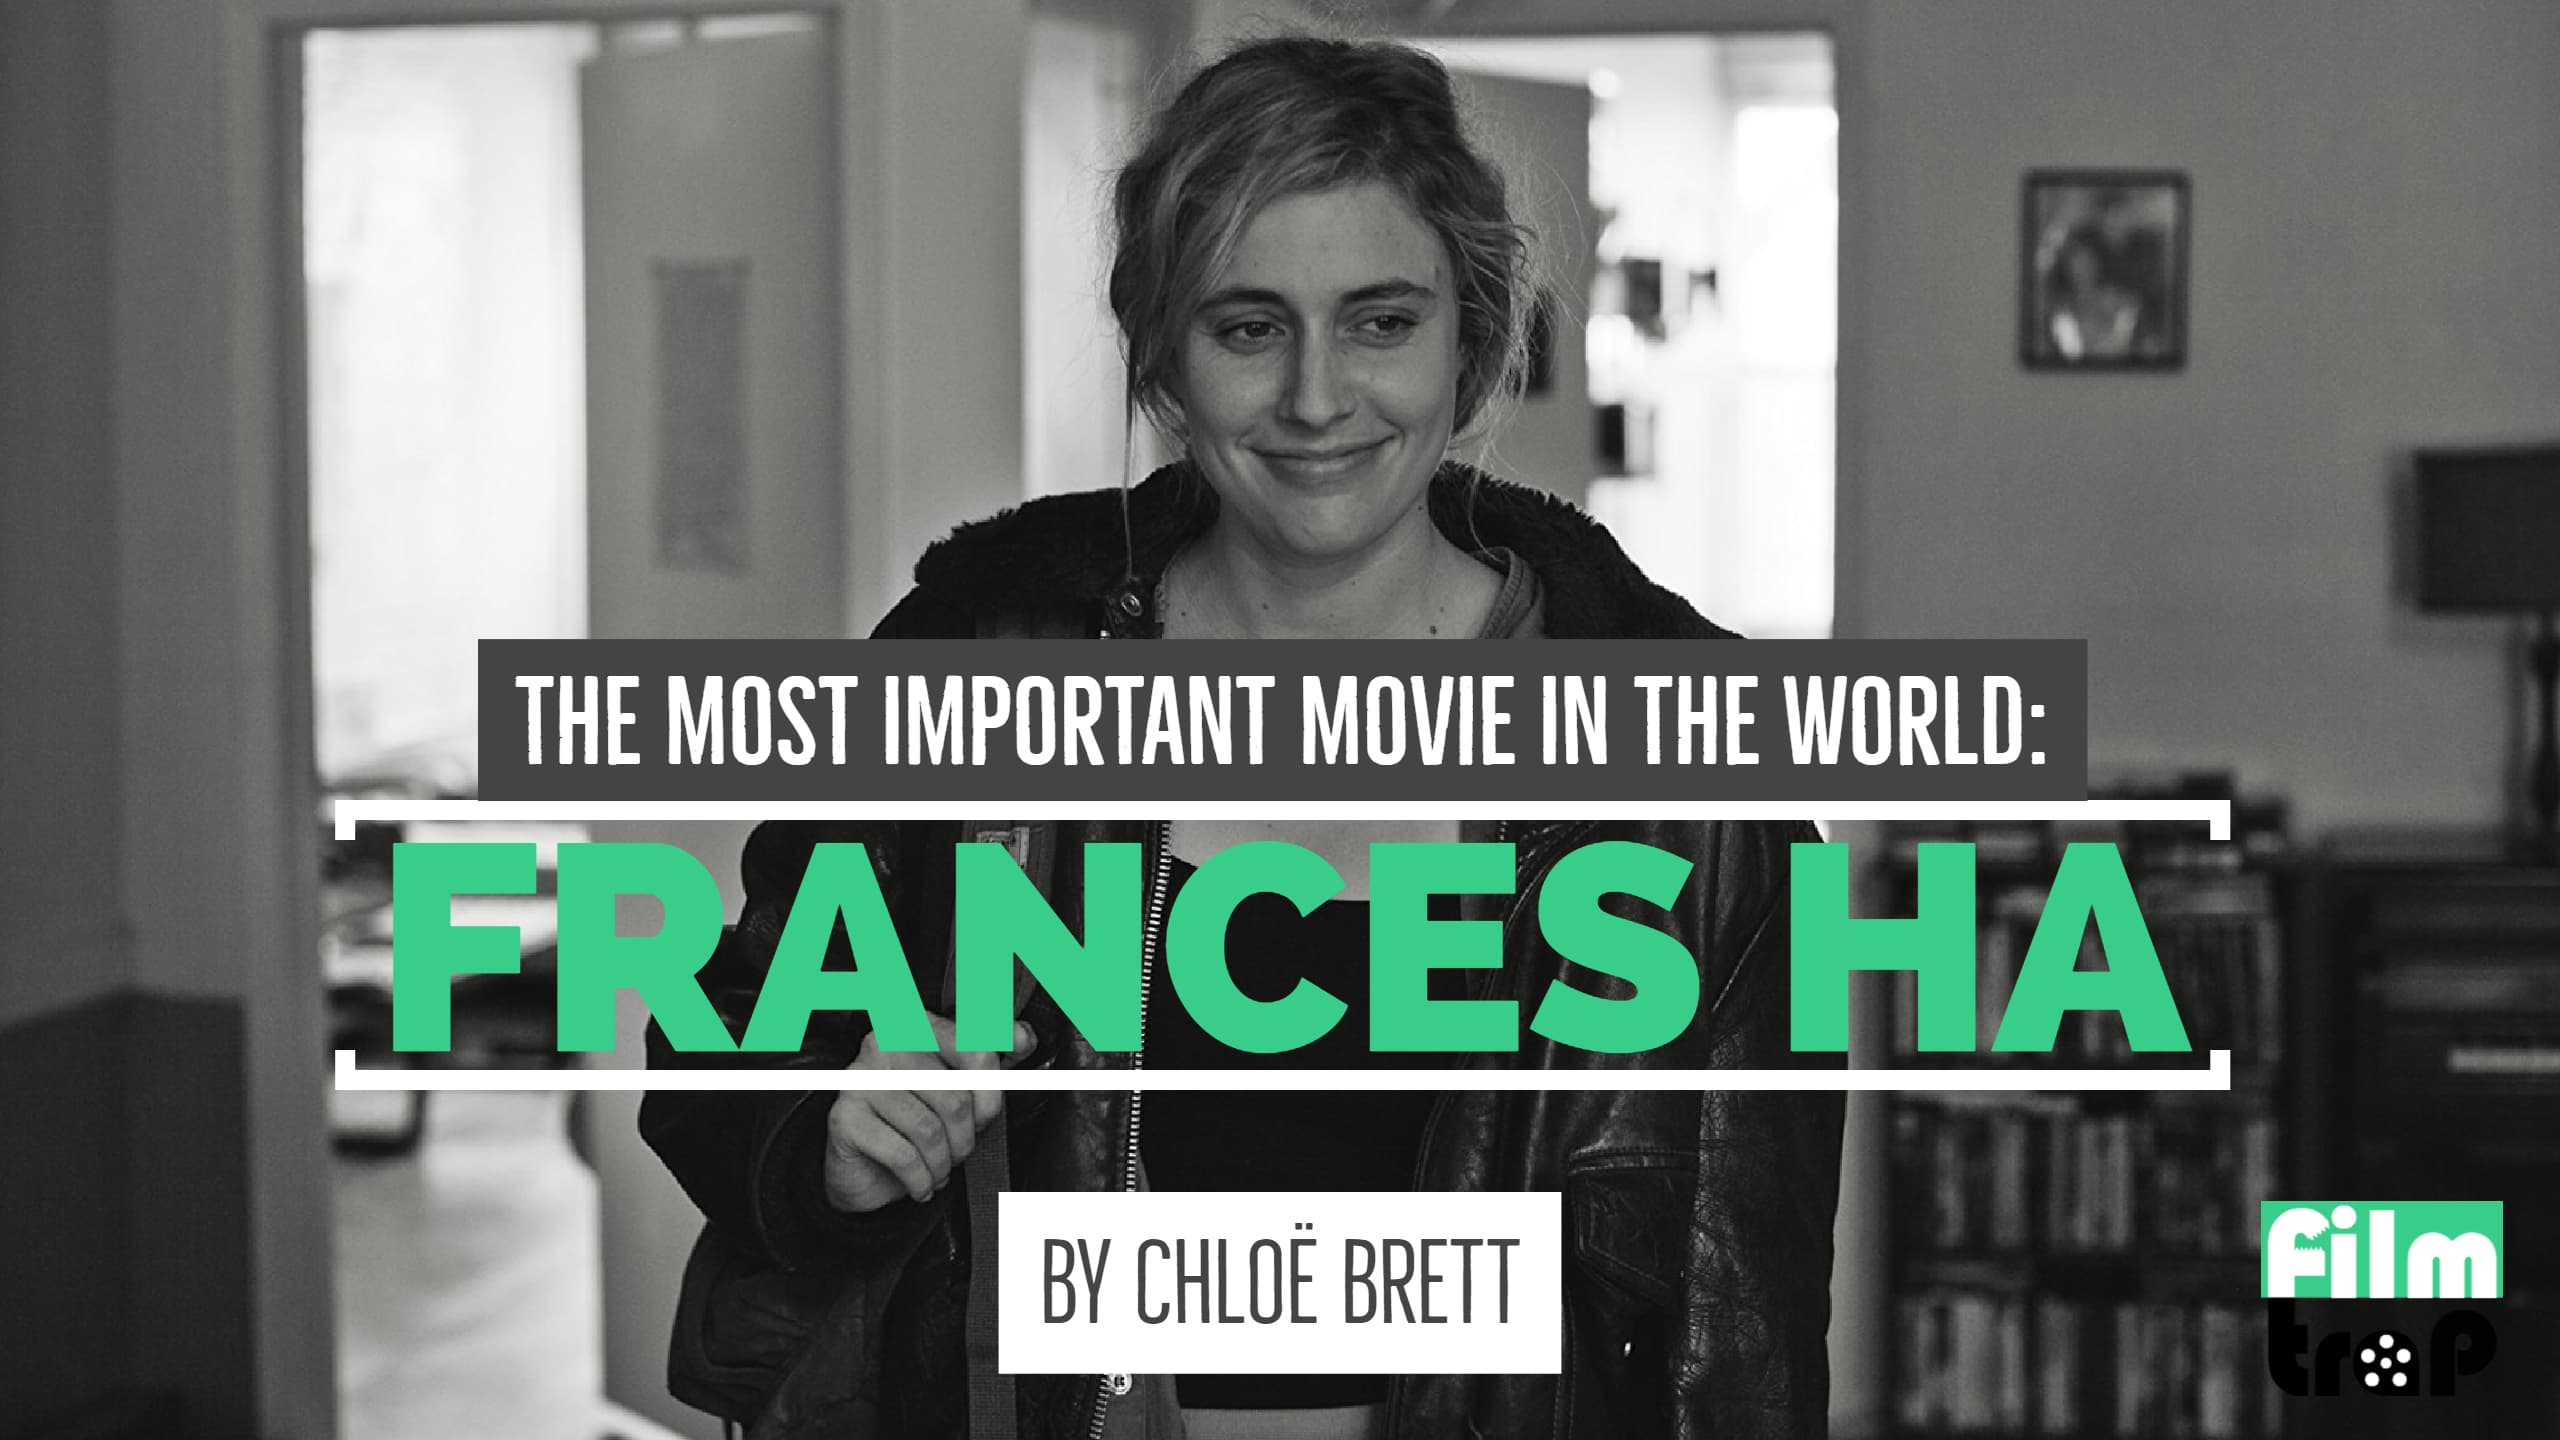 The Most Important Movie In The World: Frances Ha